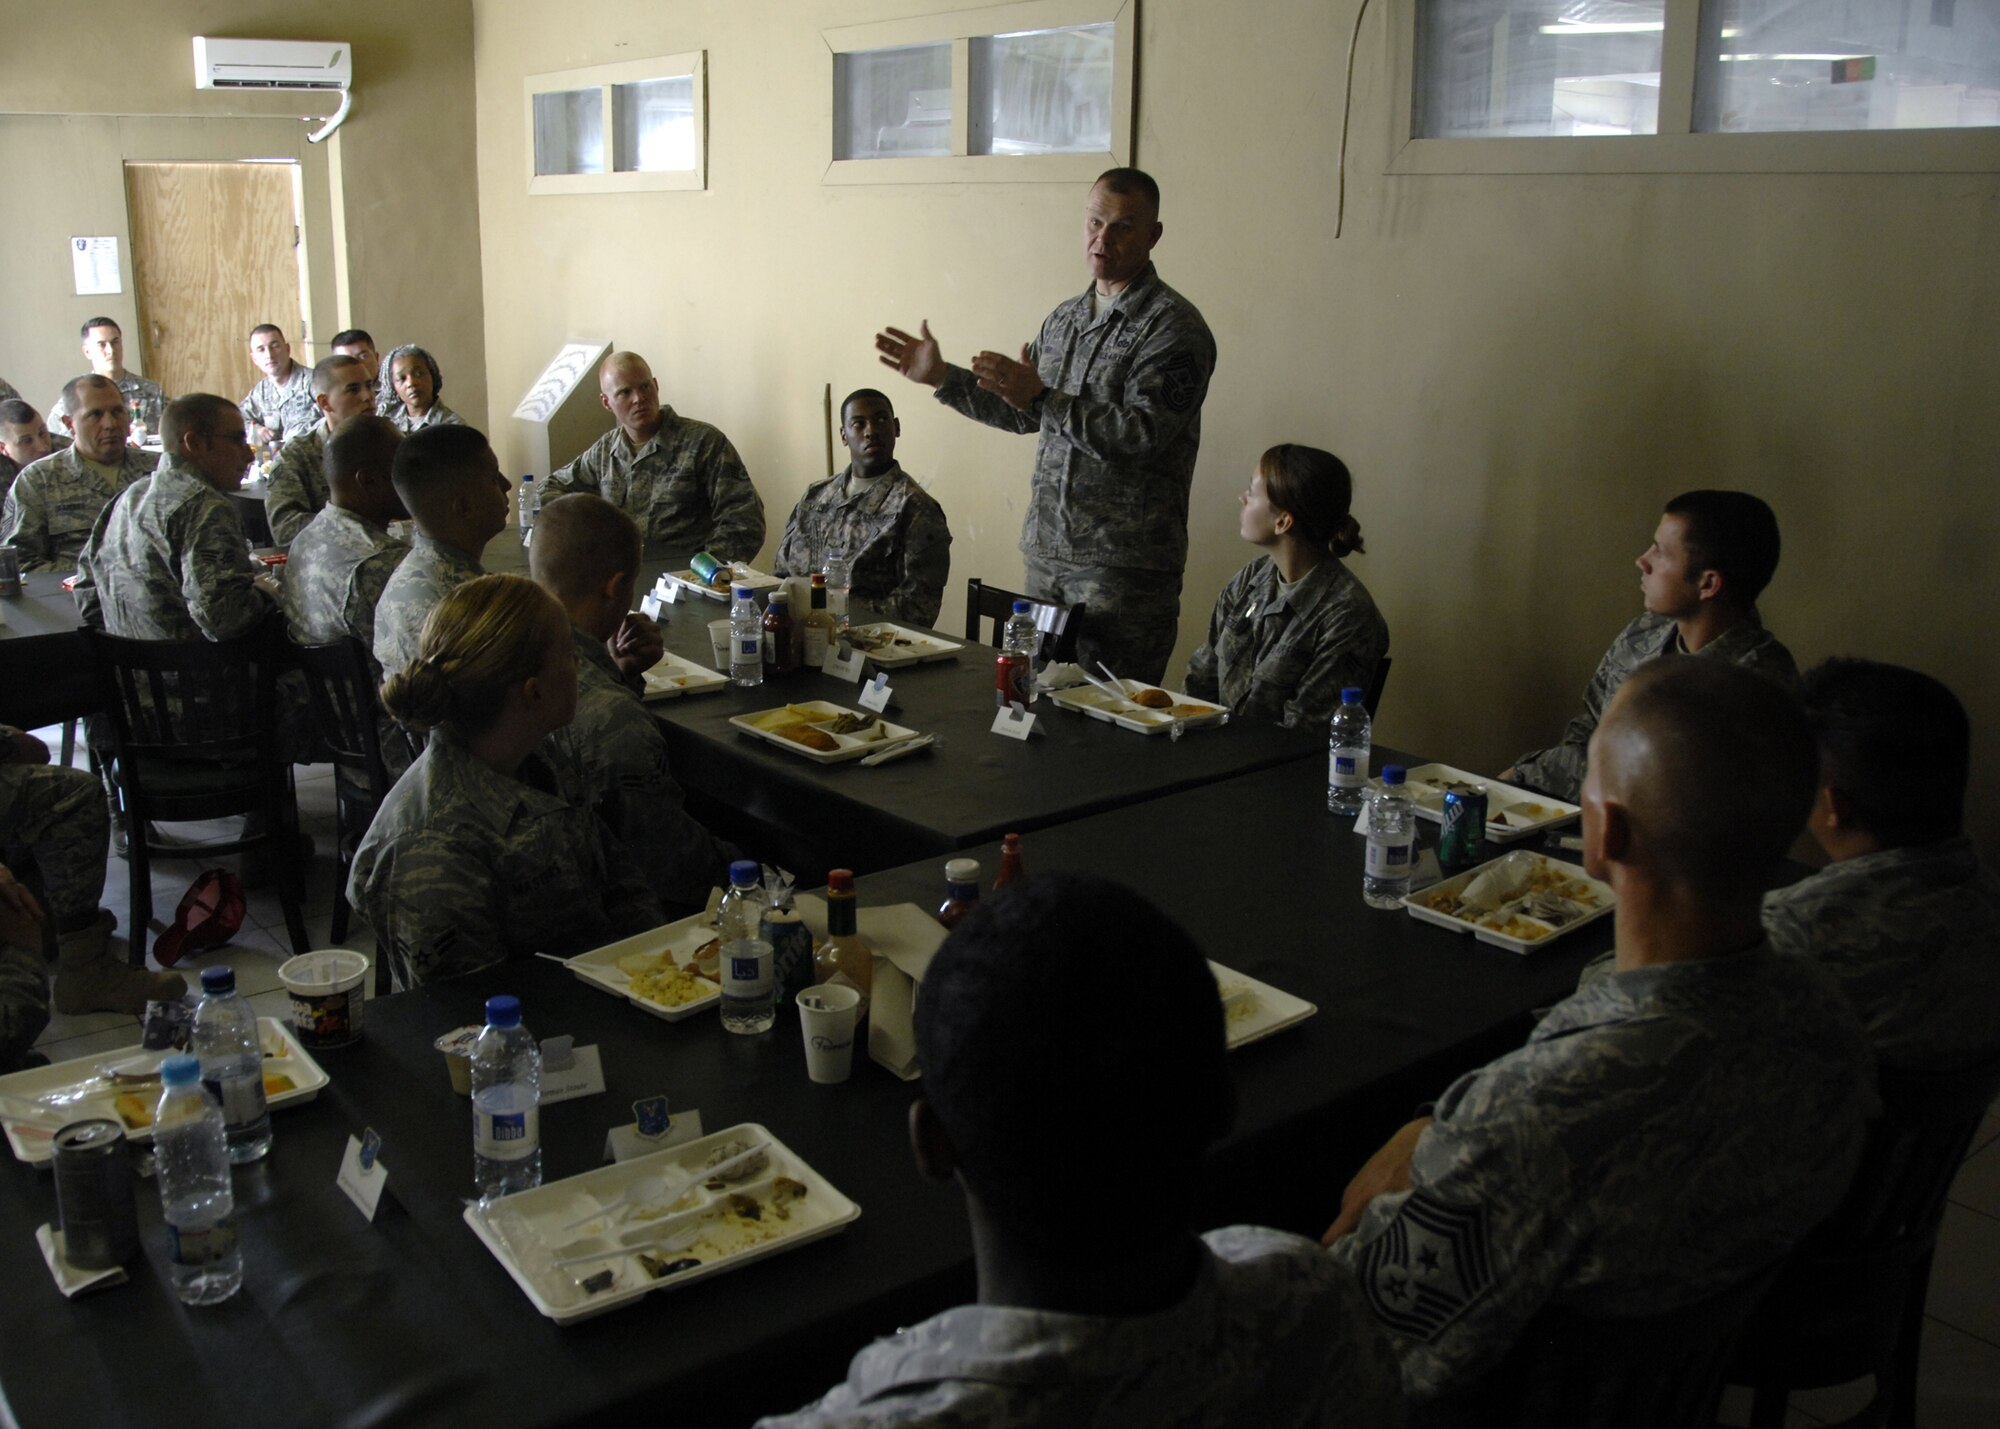 KANDAHAR AIRFIELD, Afghanistan - Chief Master Sergeant of the Air Force James Roy speaks to Airmen explaining how experiences in a combat environment will benefit them in their future careers Nov. 30, 2009.  Chief Roy also took time after the luncheon to answer Airmen's questions about current events and future plans for the Air Force. (U.S. Air Force photo/Senior Airman Timothy Taylor)